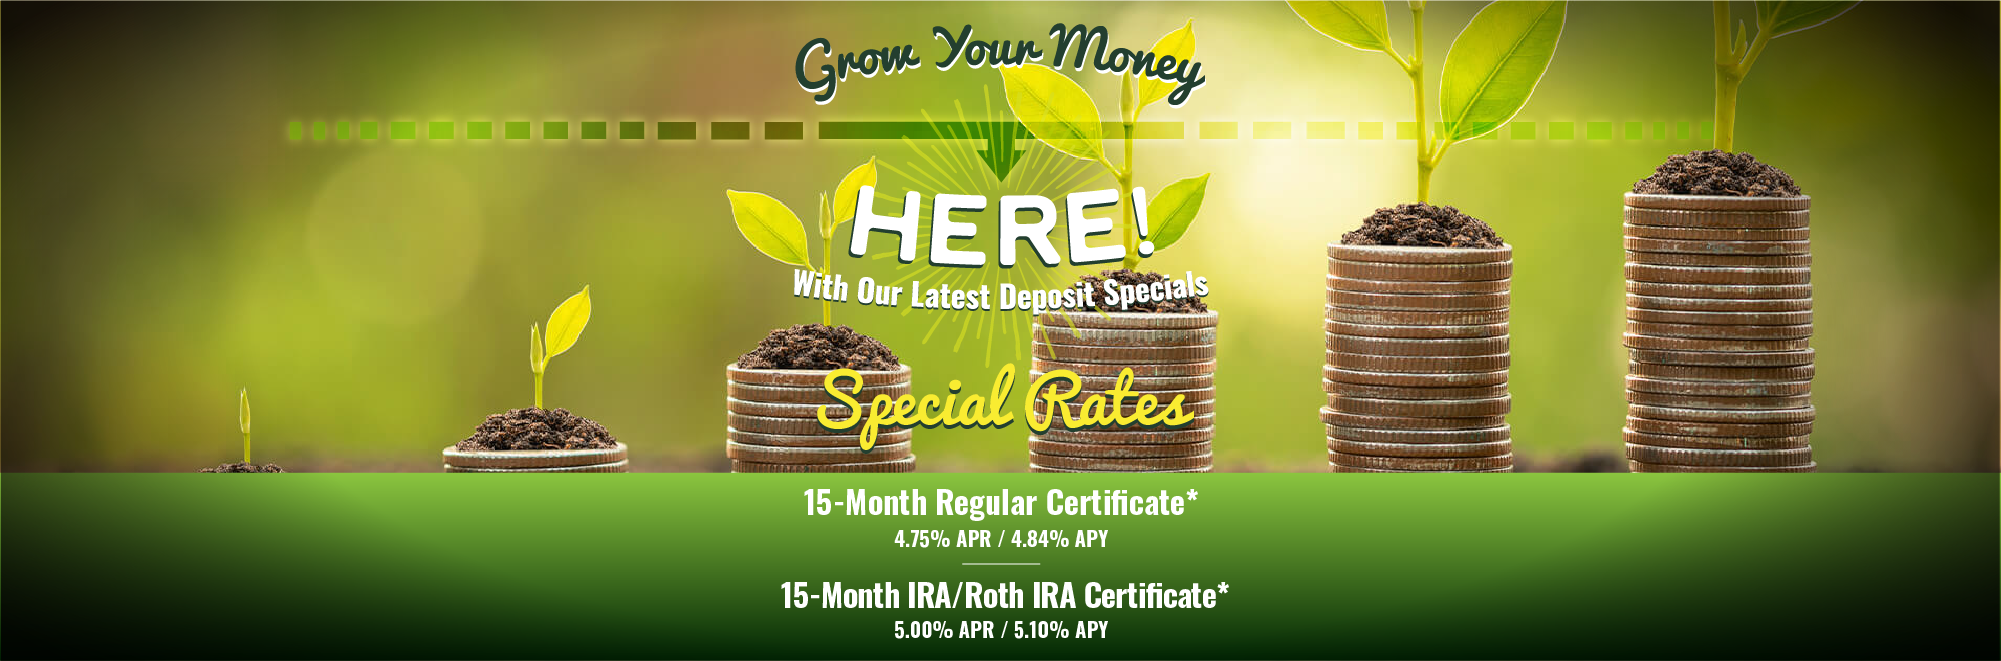 Grow Your Money Here! - With our latest deposit specials - See our special Rates.